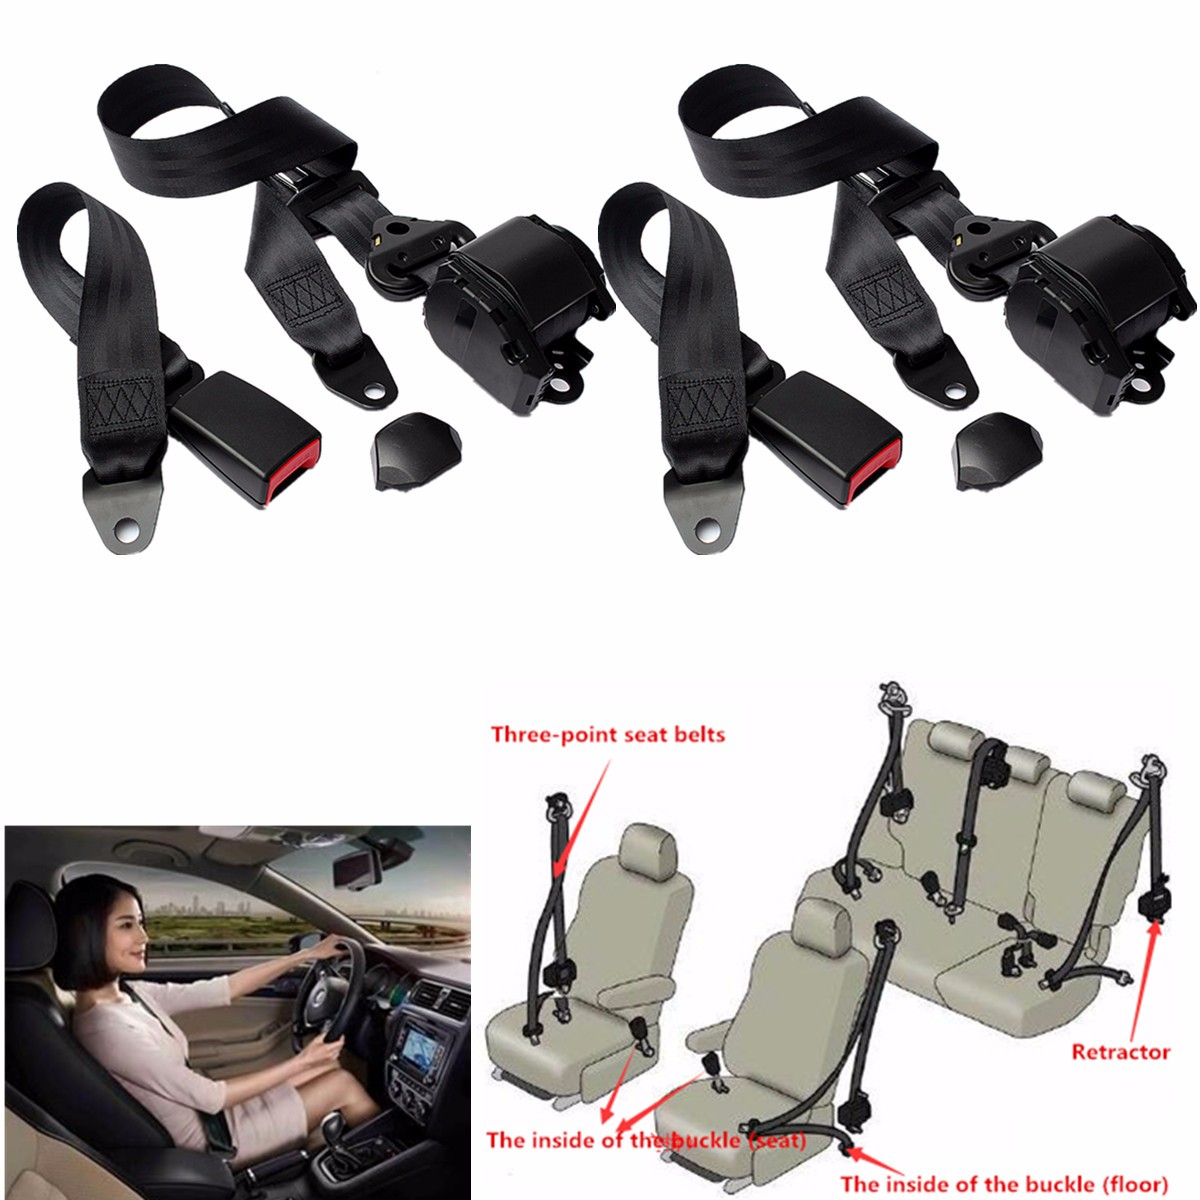 3 Point Auto Car Truck Bus Van Safety Seat Security Universal Retractable Adjustable Truck Lap Belt Set Kit Safety Accessories